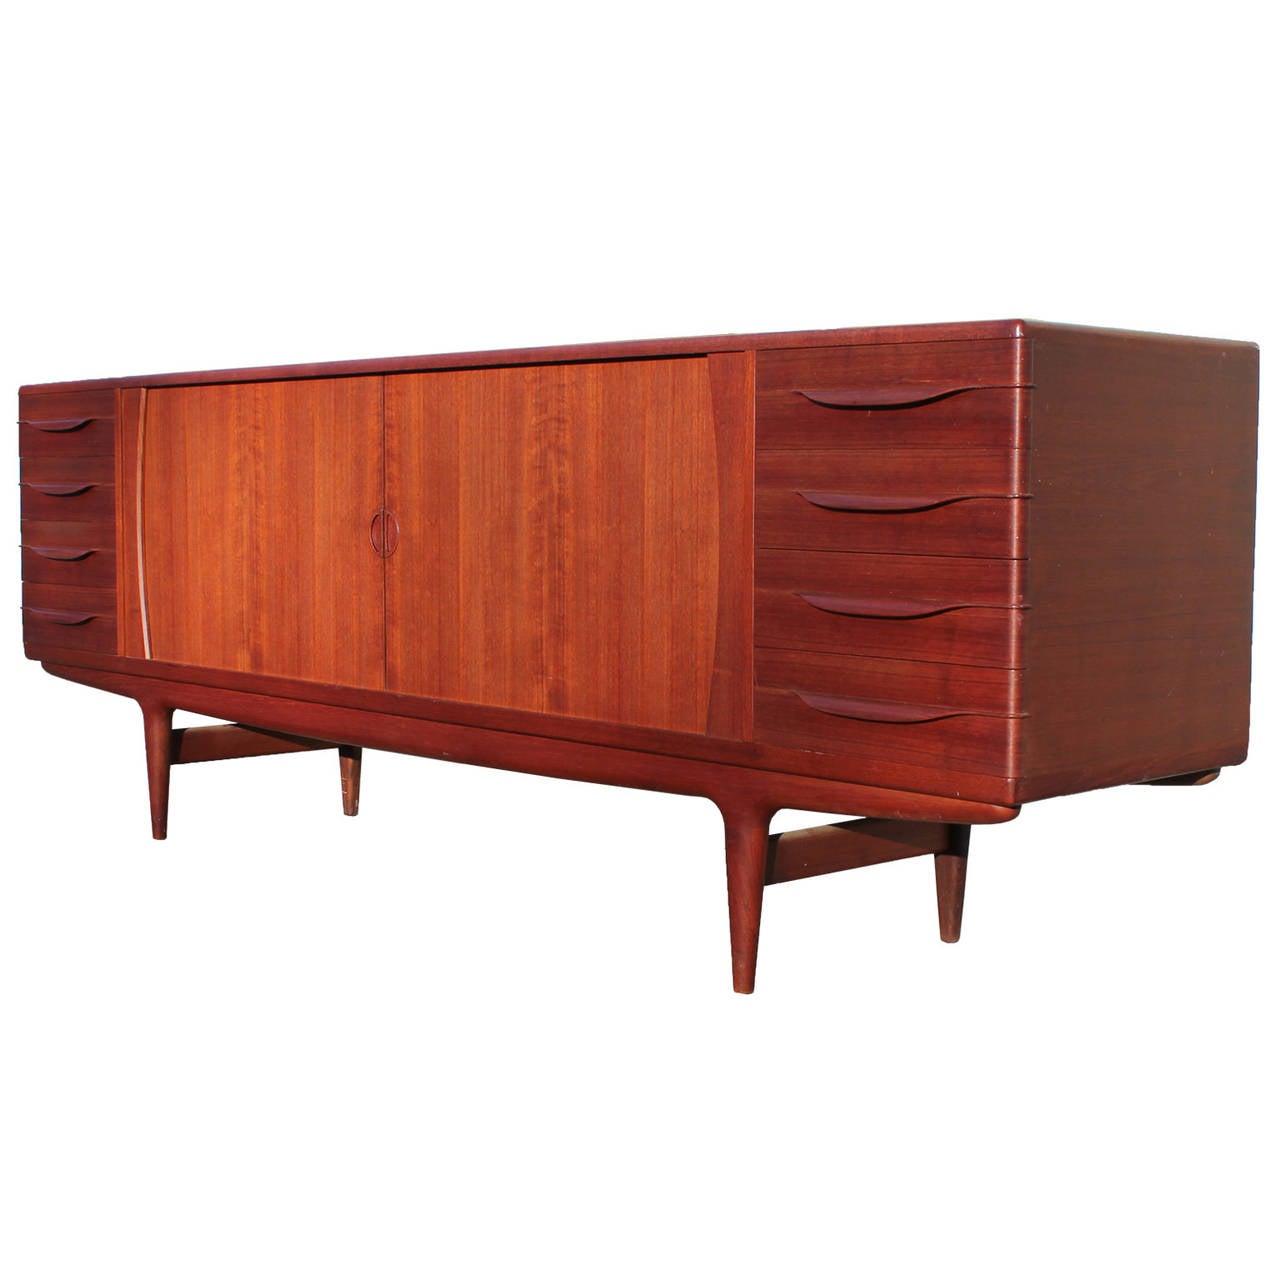 Beautiful credenza designed by Johannes Anderson has incredible attention to detail and craftsmanship. Tambour doors open to reveal adjustable shelving. Eight felt lined drawers provide excellent storage. Top drawers hide an additional sliding